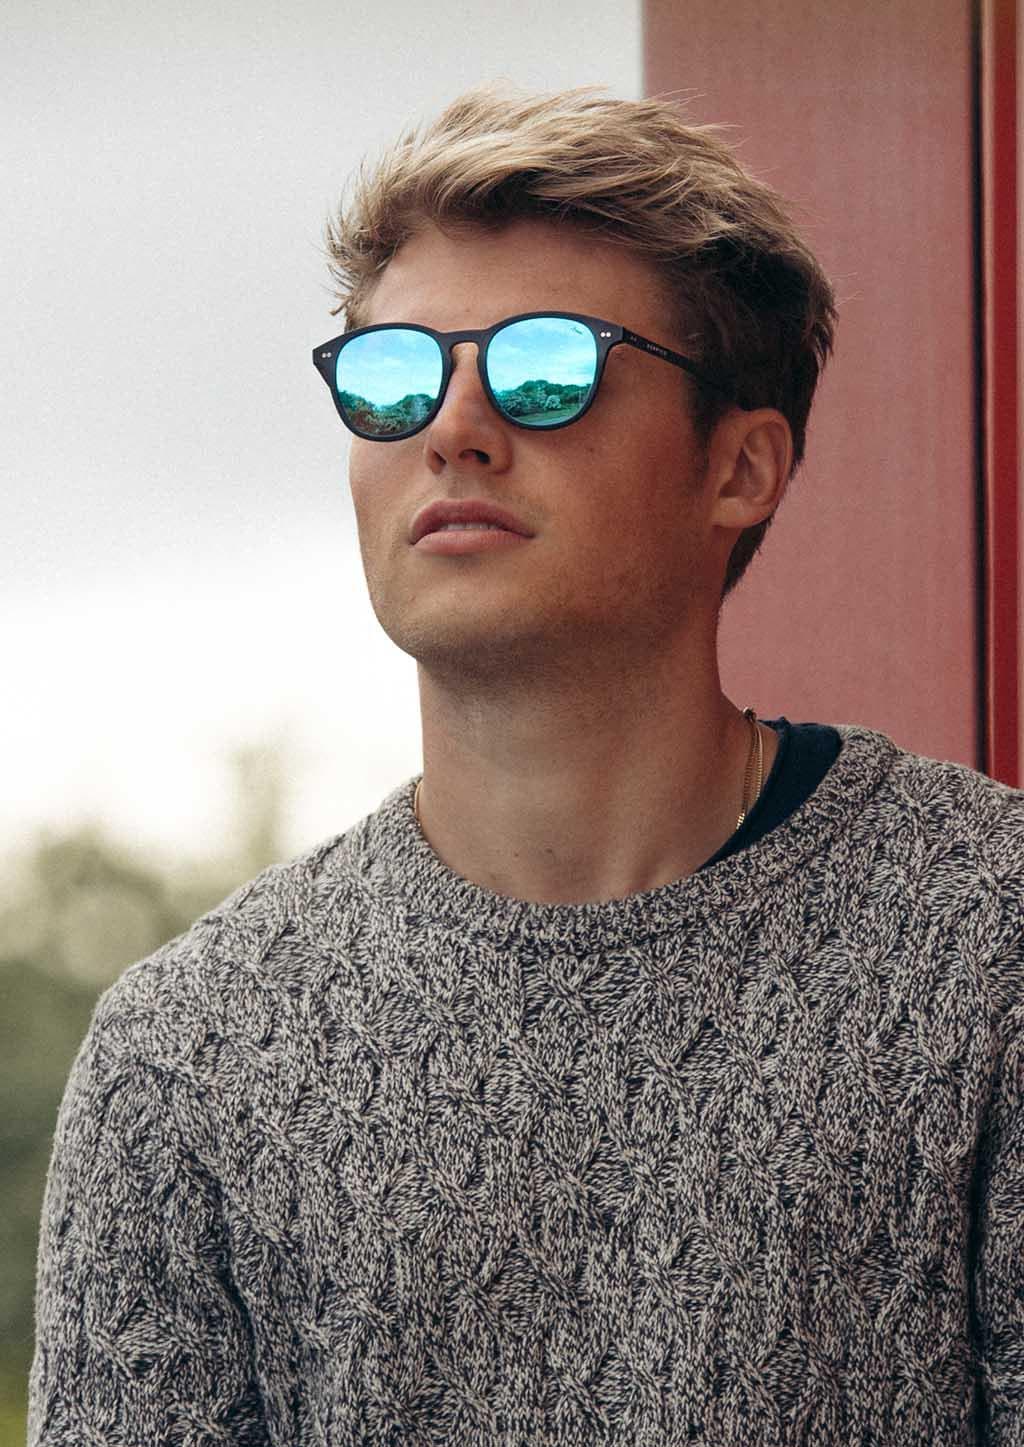 Hybrid - Halo, carbon fiber and acetate sunglasses of the highest quality. On model with blue mirror lenses.